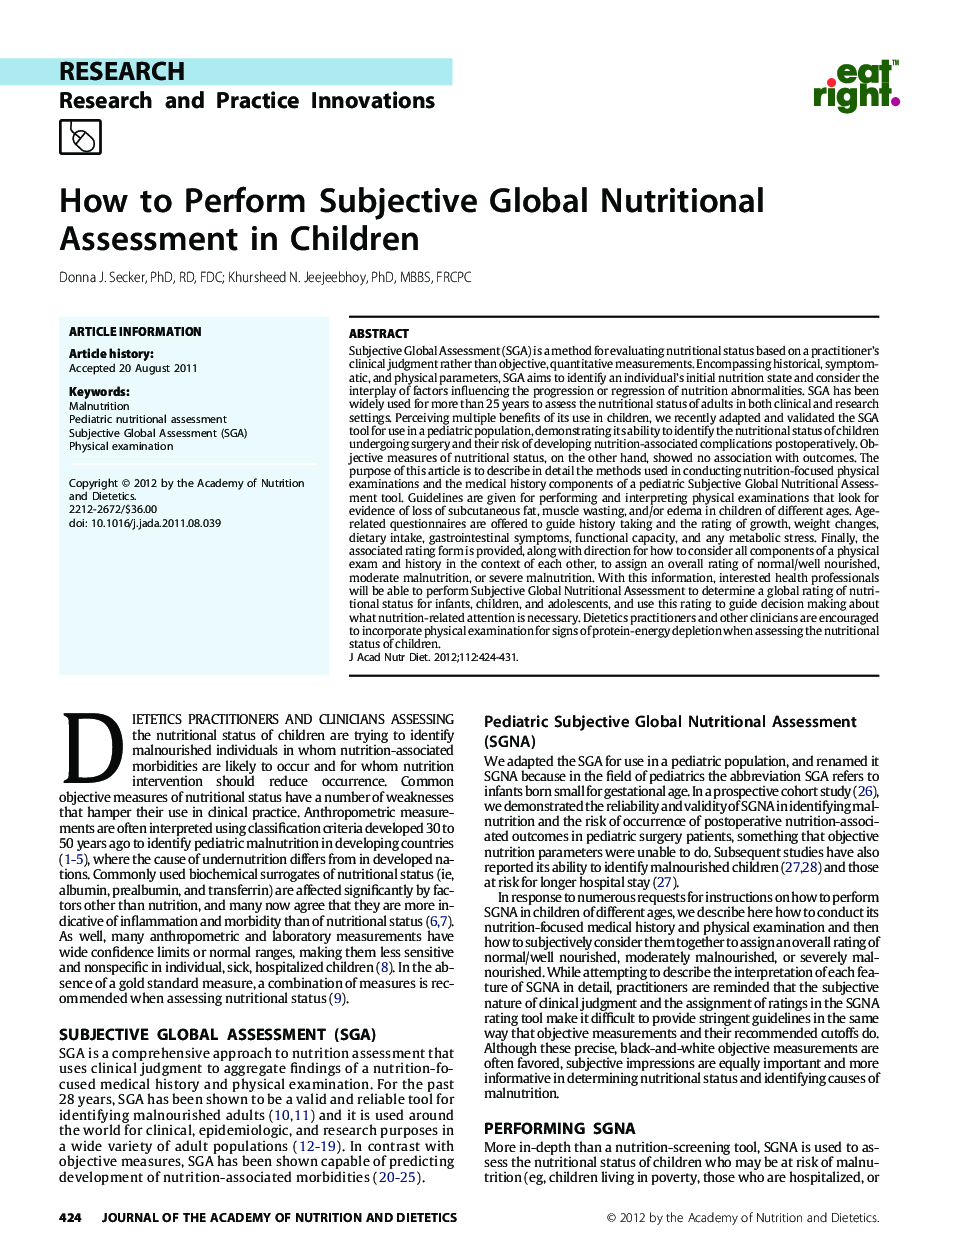 How to Perform Subjective Global Nutritional Assessment in Children